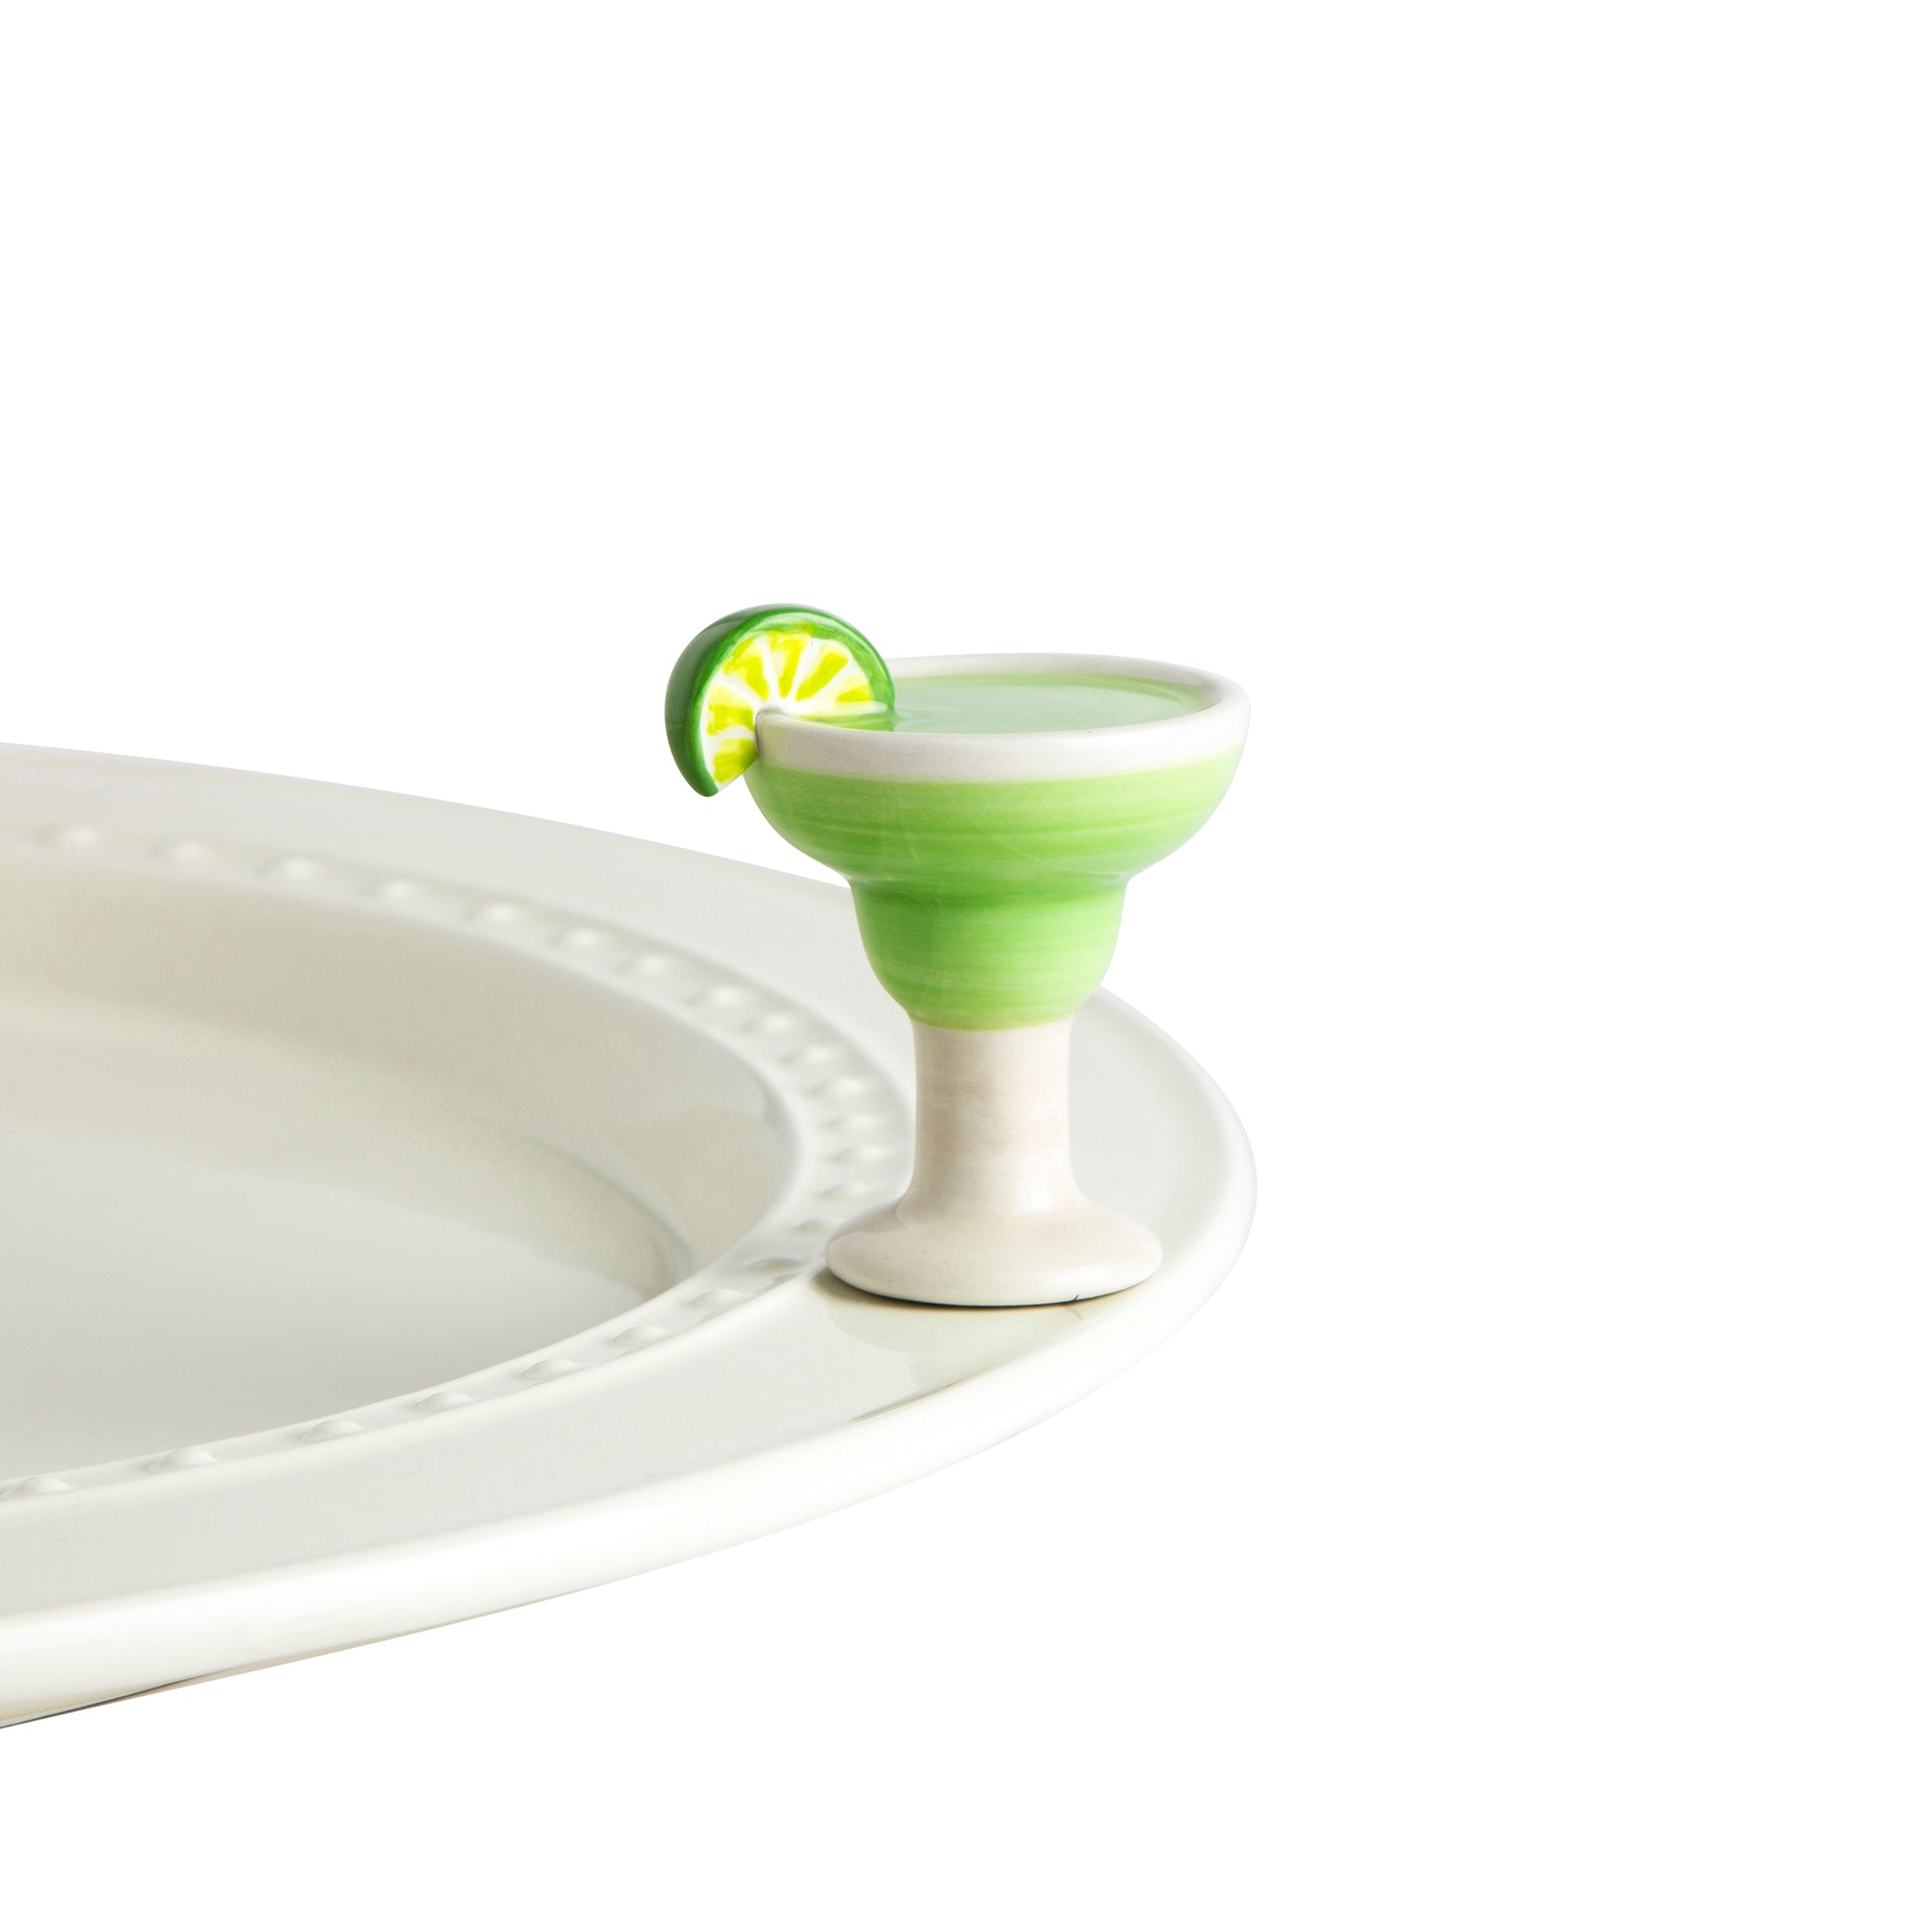 A130 Nora Fleming Lime & Salt Please mini features a green and white margarita glass with a lime slice on rim. Shop The Painted Cottage an Annapolis boutique.